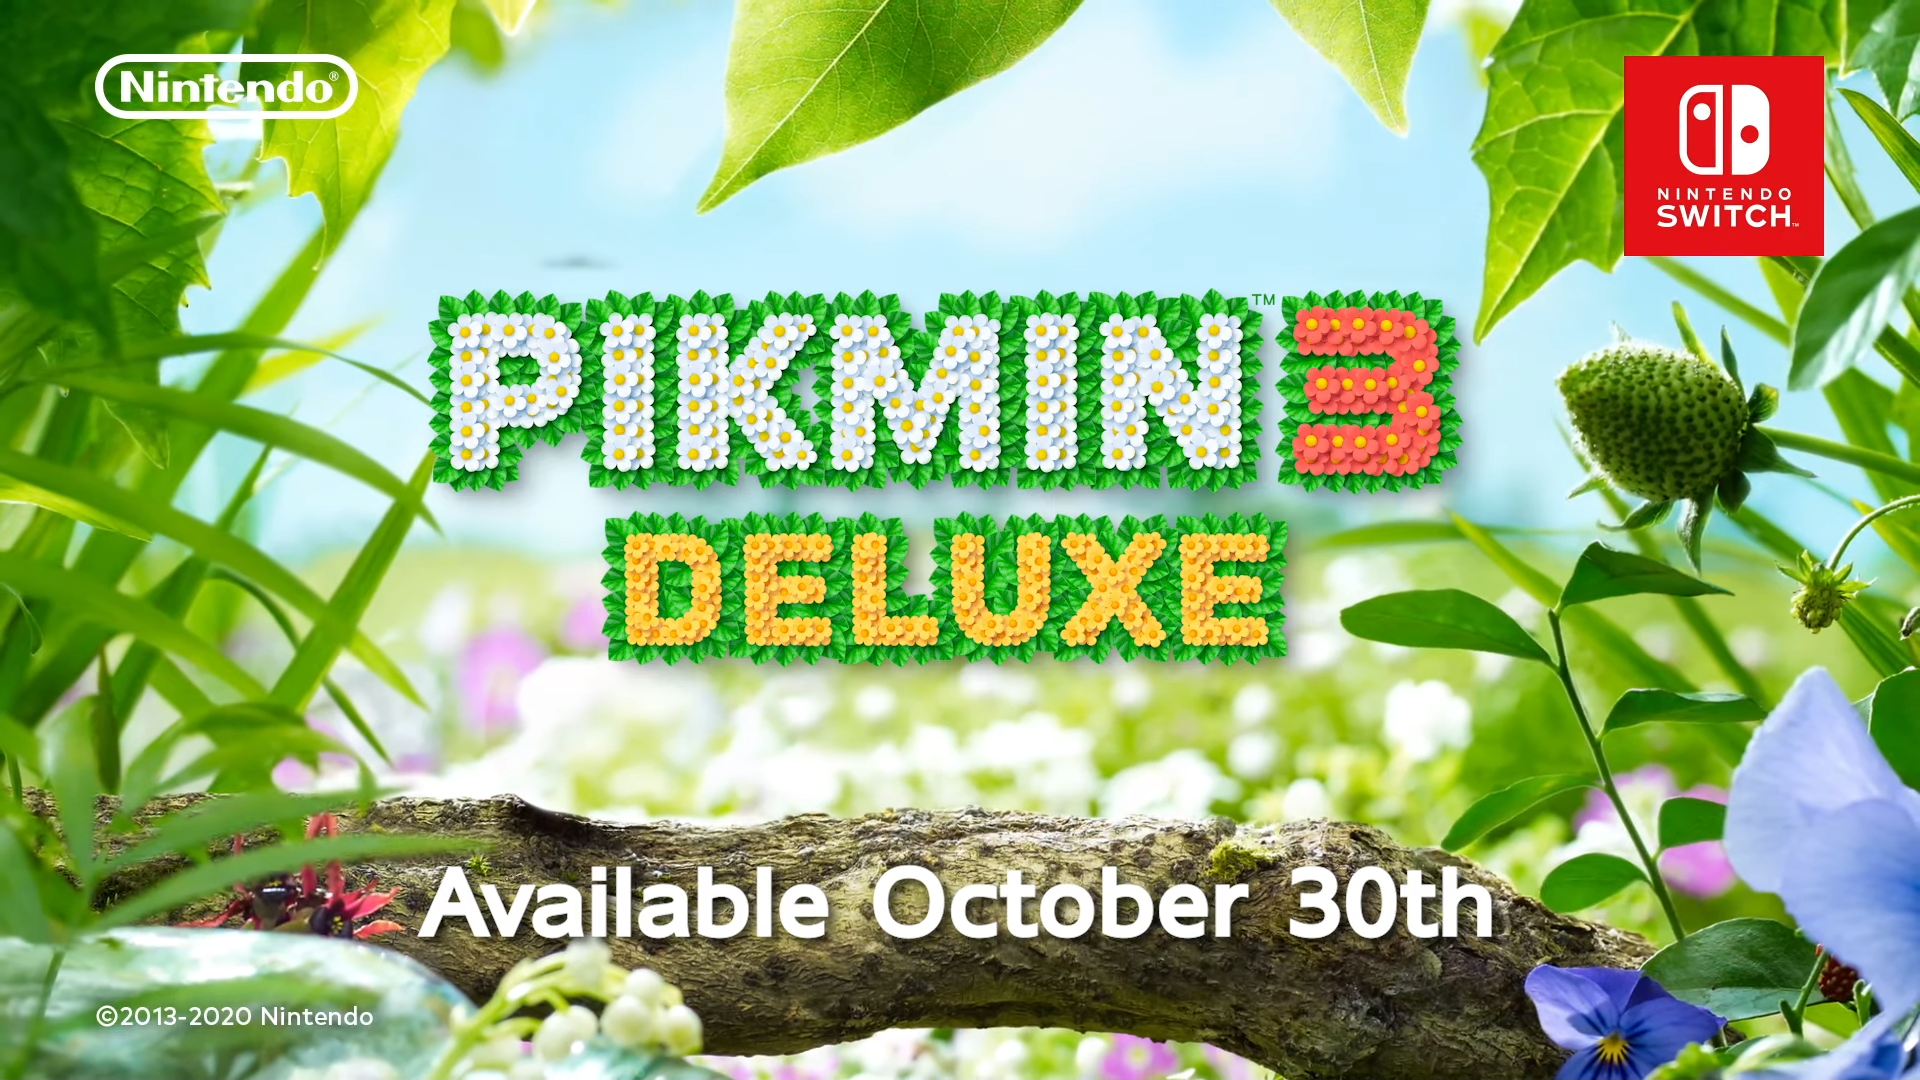 Pikmin 3 Deluxe will march onto Nintendo Switch this October